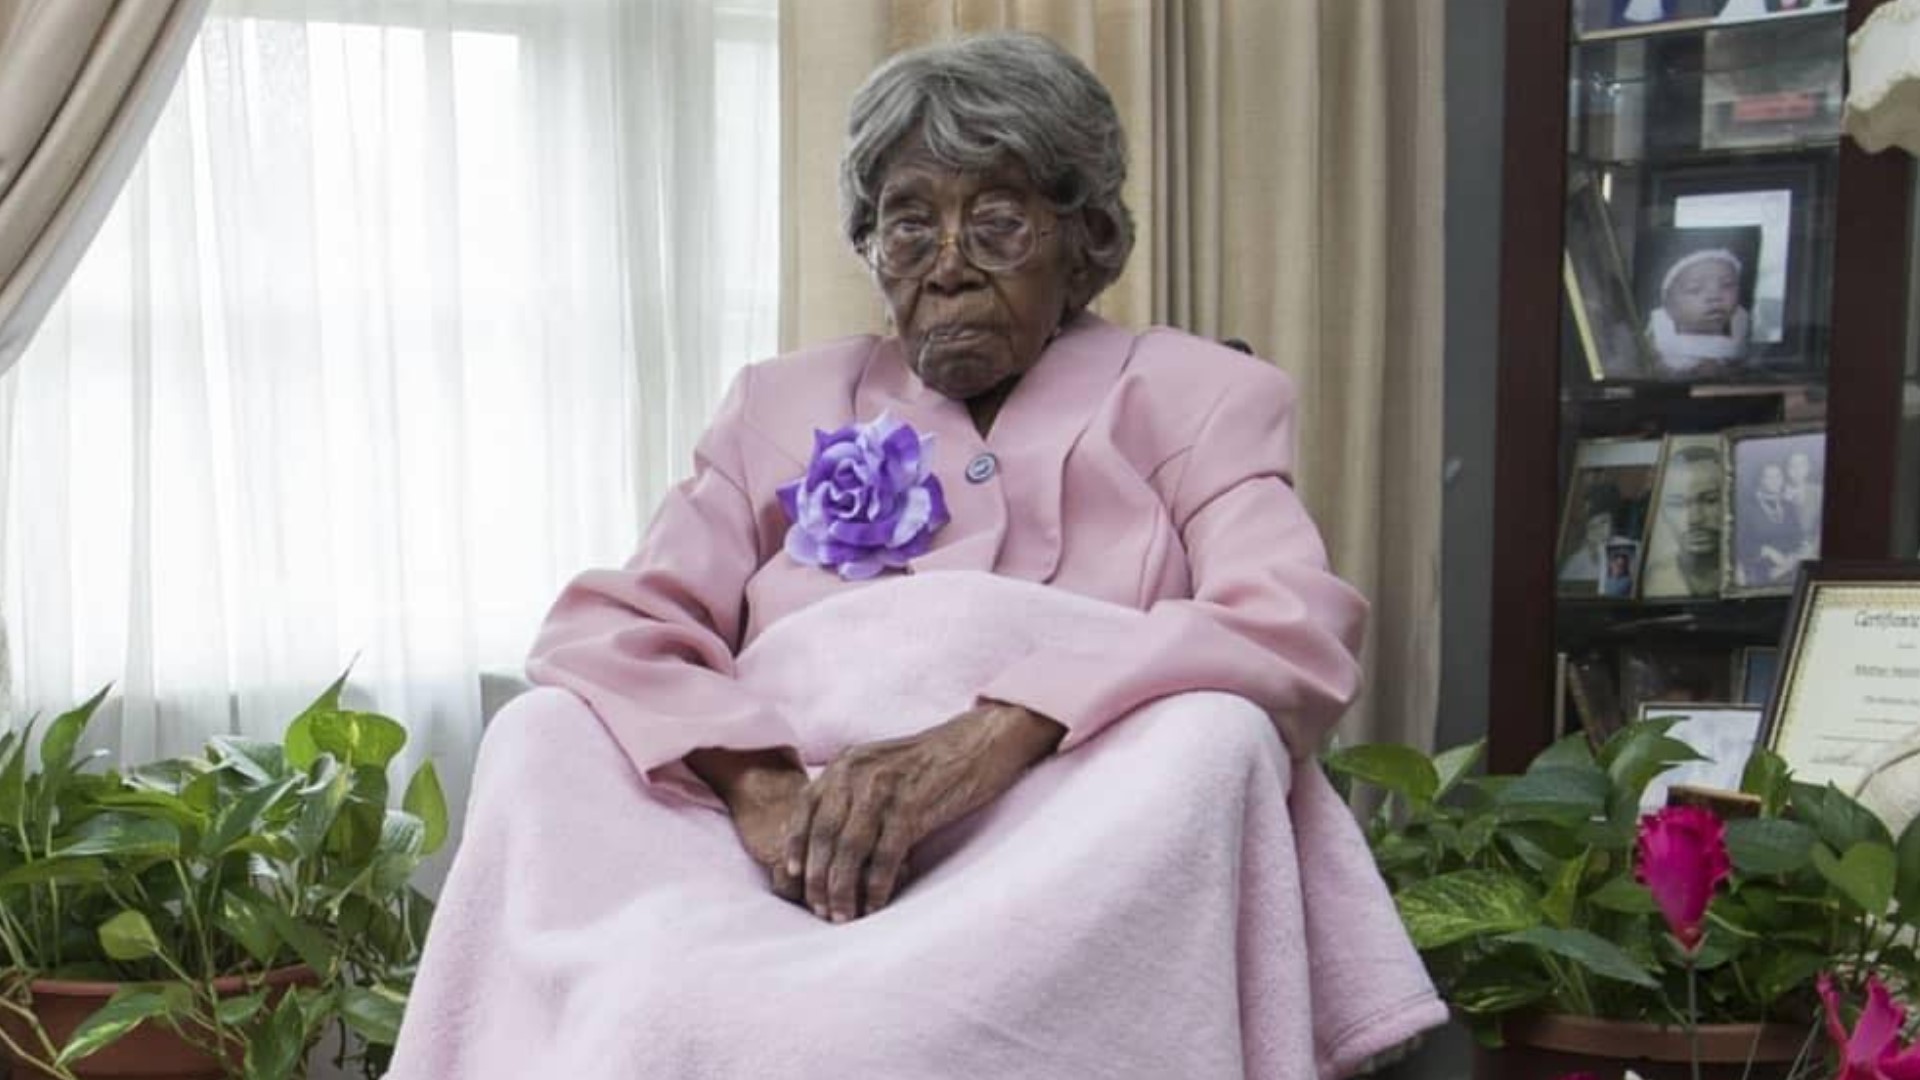 The oldest living American is set to celebrate her 116th birthday in Charlotte, North Carolina.